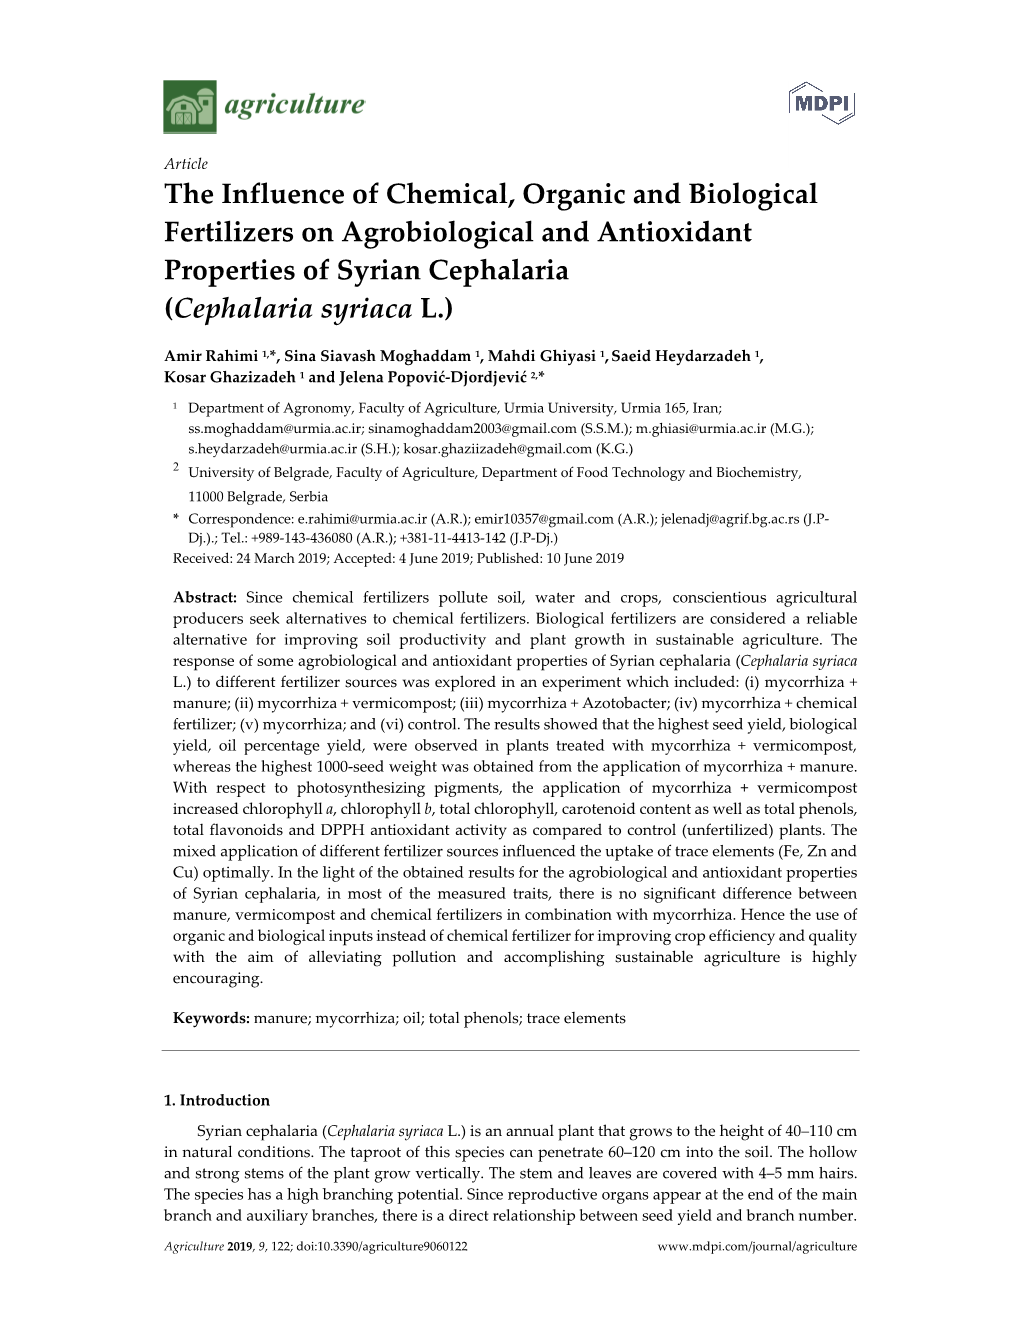 The Influence of Chemical, Organic and Biological Fertilizers on Agrobiological and Antioxidant Properties of Syrian Cephalaria (Cephalaria Syriaca L.)